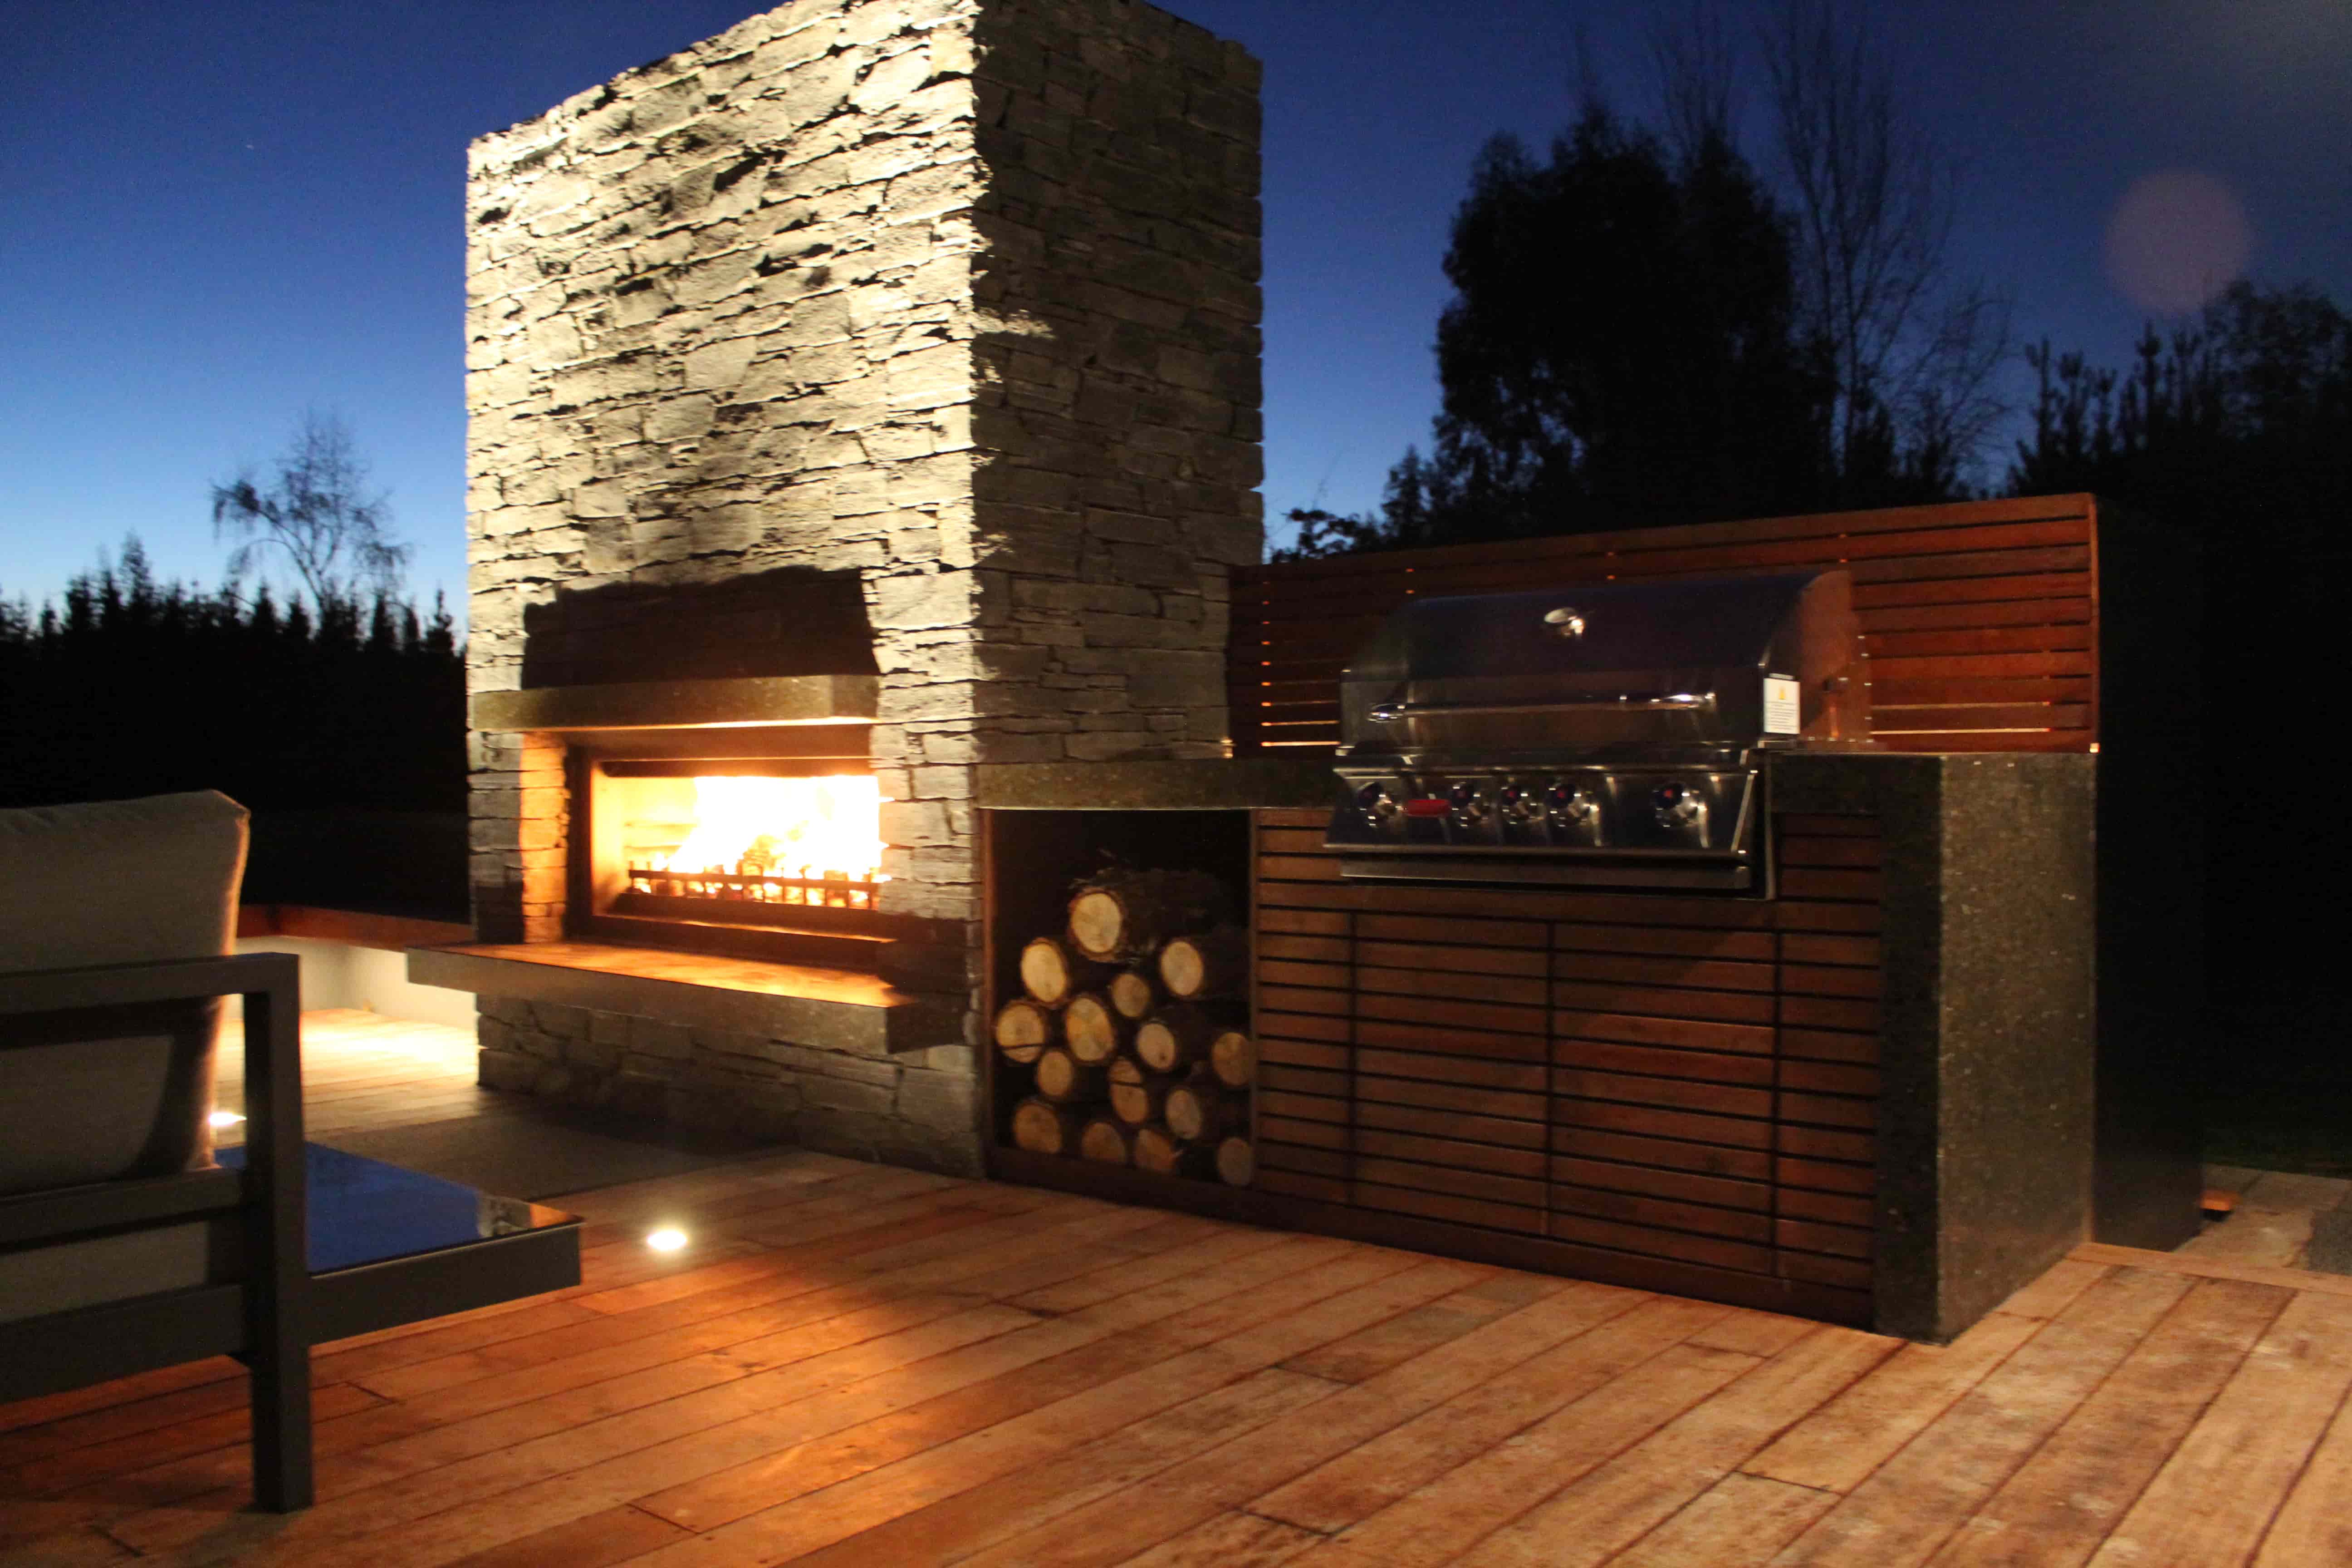 cooking on an outdoor fireplace